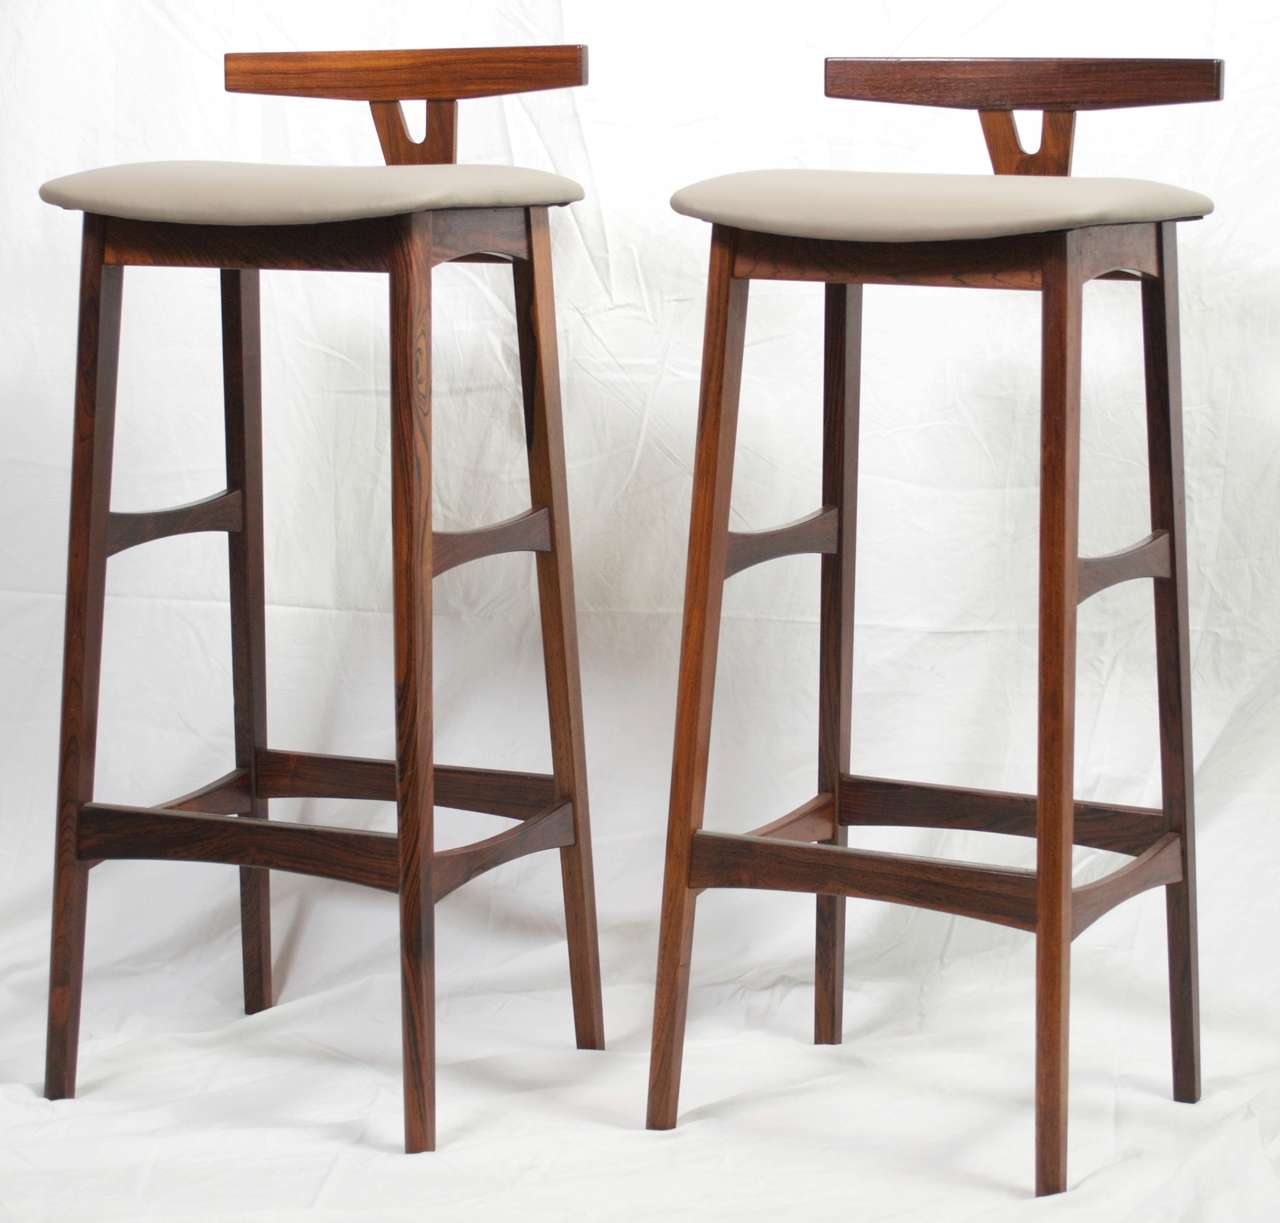 For your consideration is this handsome pair of 1960's vintage Danish Modern bar stools in rosewood by Dyrlund.  These mid century stools have new padding and have been professionally reupholstered in grey leather. The rosewood is in well kept